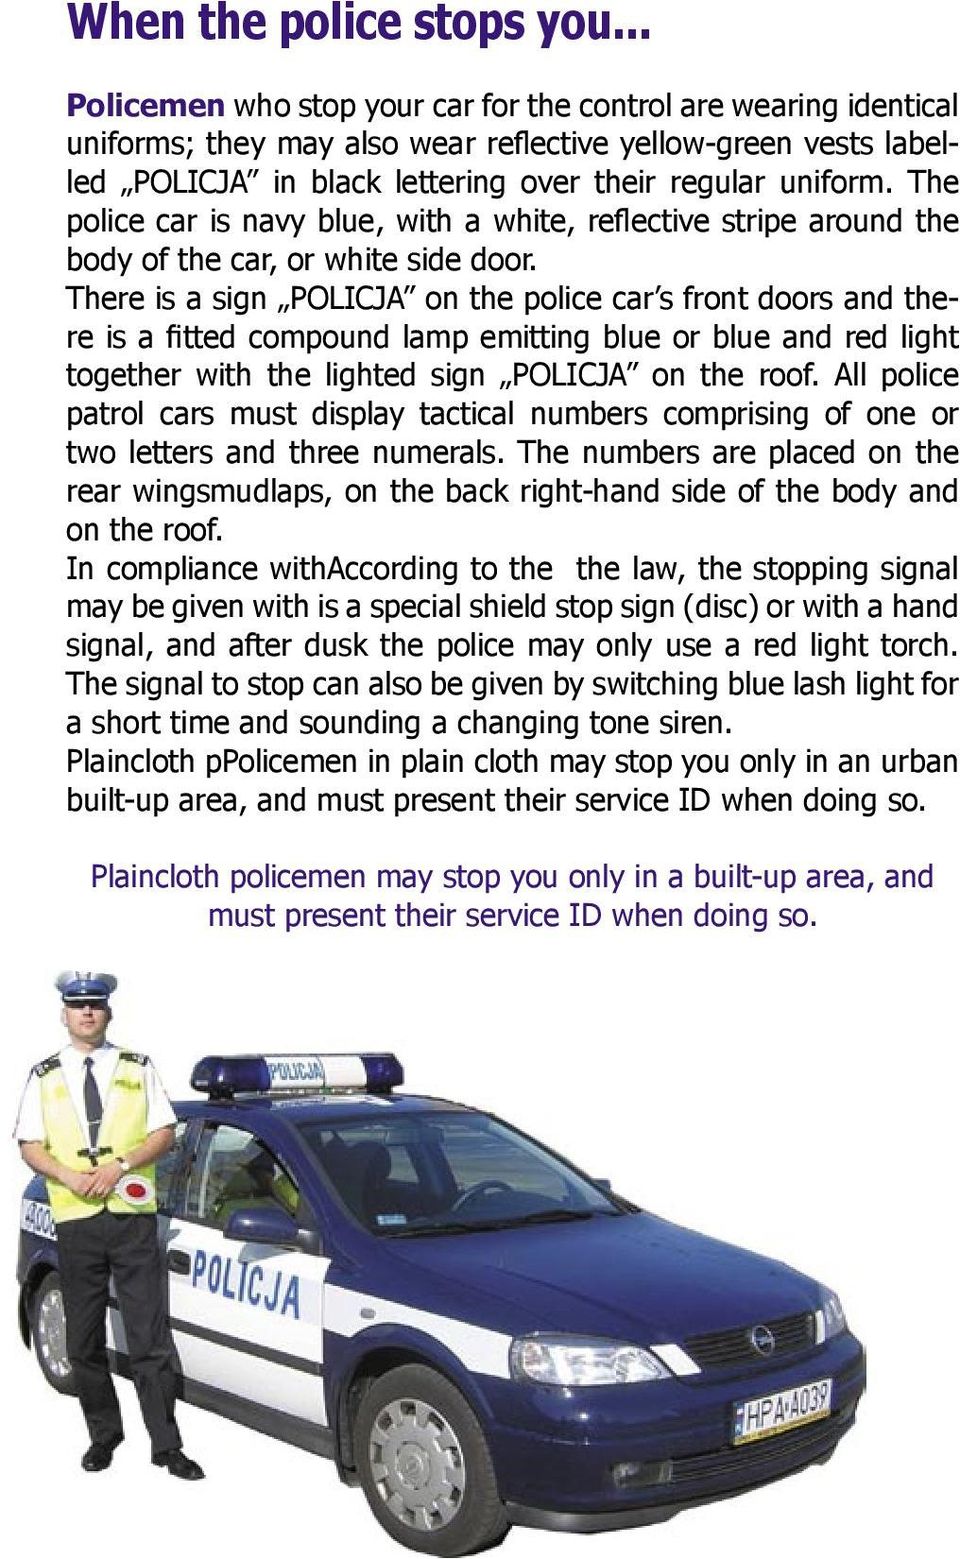 The police car is navy blue, with a white, reflective stripe around the body of the car, or white side door.